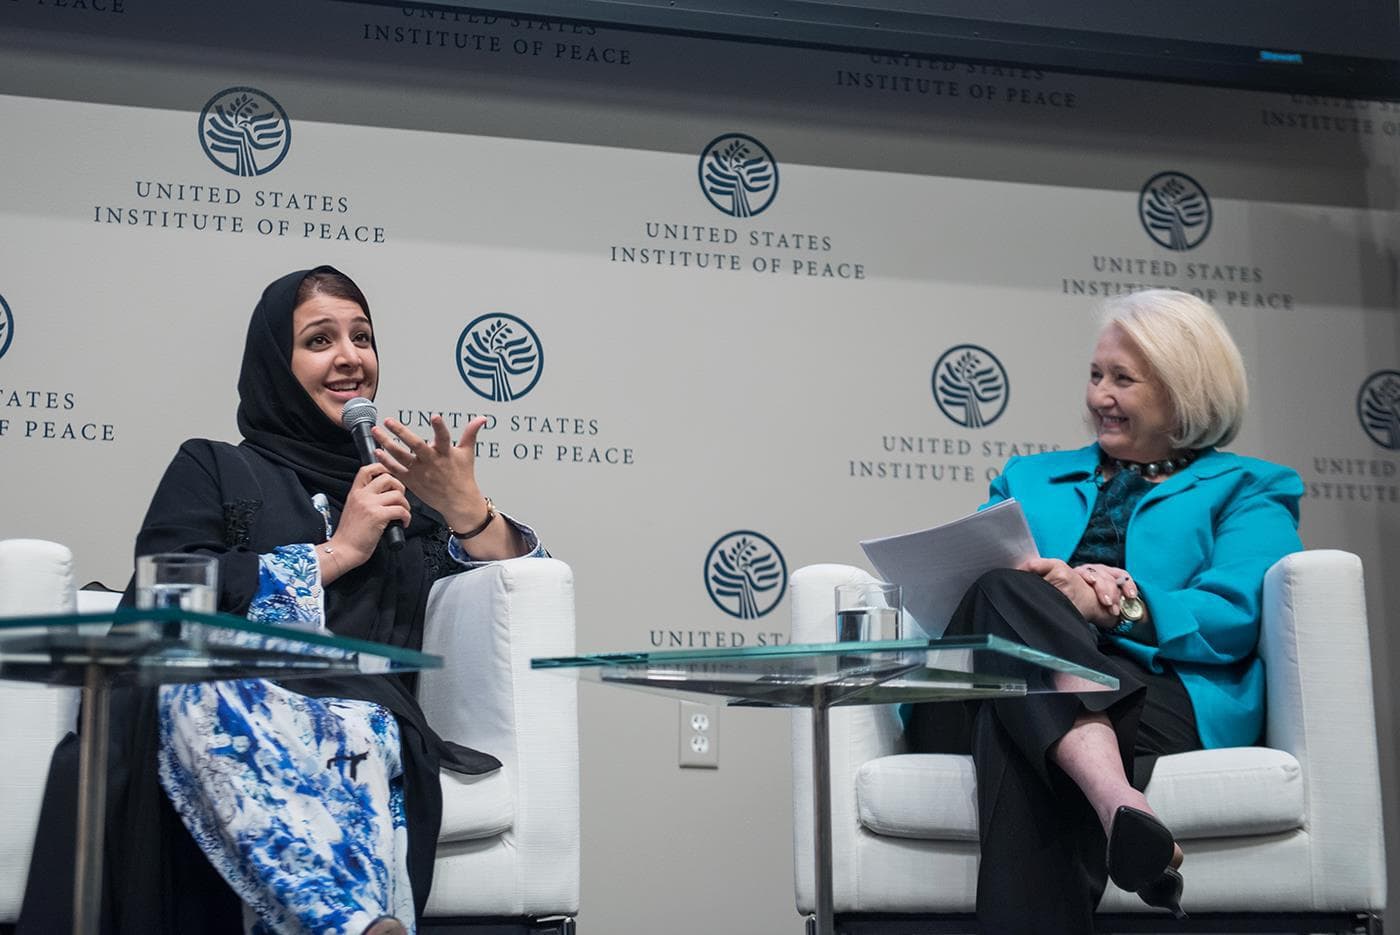 During the third annual Sheikha Fatima Lectureship: "A Shared Global Vision for Women and Peacebuilding”, United Arab Emirates Minister of State Reem Ibrahim Al Hashimy United States Institute of Peace President Nancy Lindborg and Georgetown Institute for Women, Peace, and Security Executive Director Ambassador Melanne Verveer discussed advacing the role of women in all societies, as part of USIP’s focus on building the role of women in the peaceful resolution of conflicts worldwide. More on women in the UA